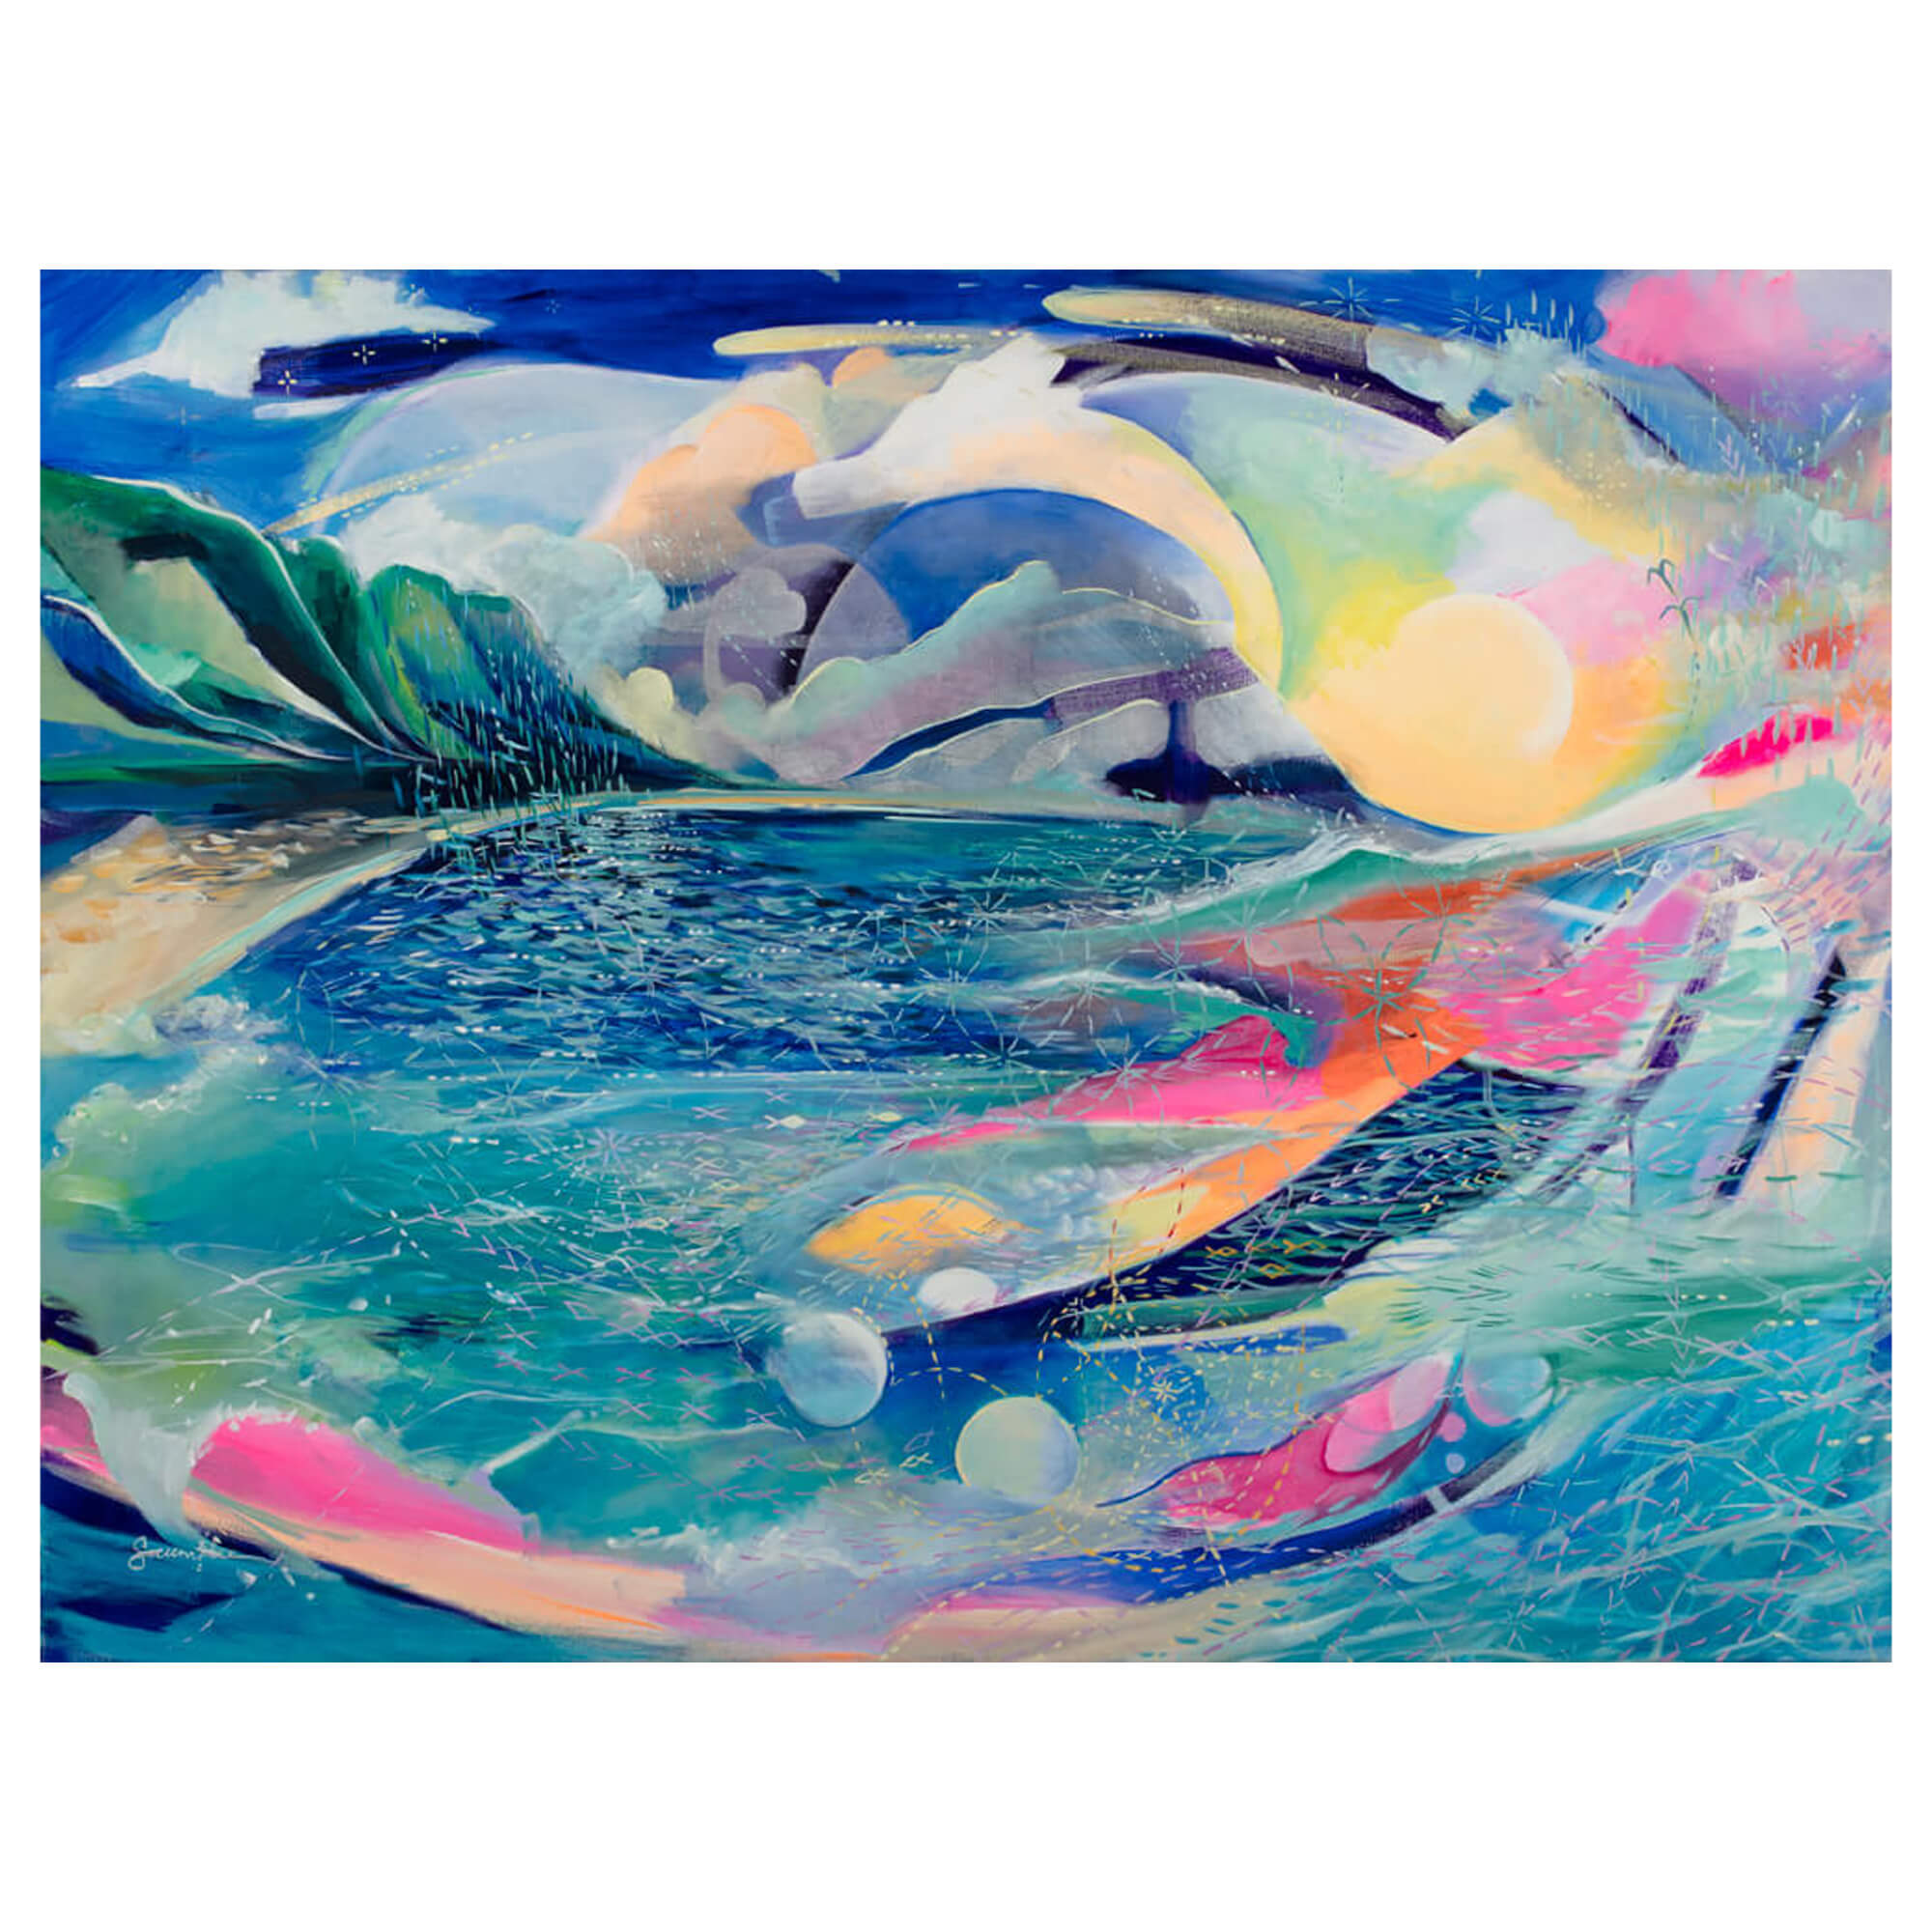 Canvas art print of an abstract artwork of a seascape with vibrant pastel colors Hawaii artist Saumolia Puapuaga 